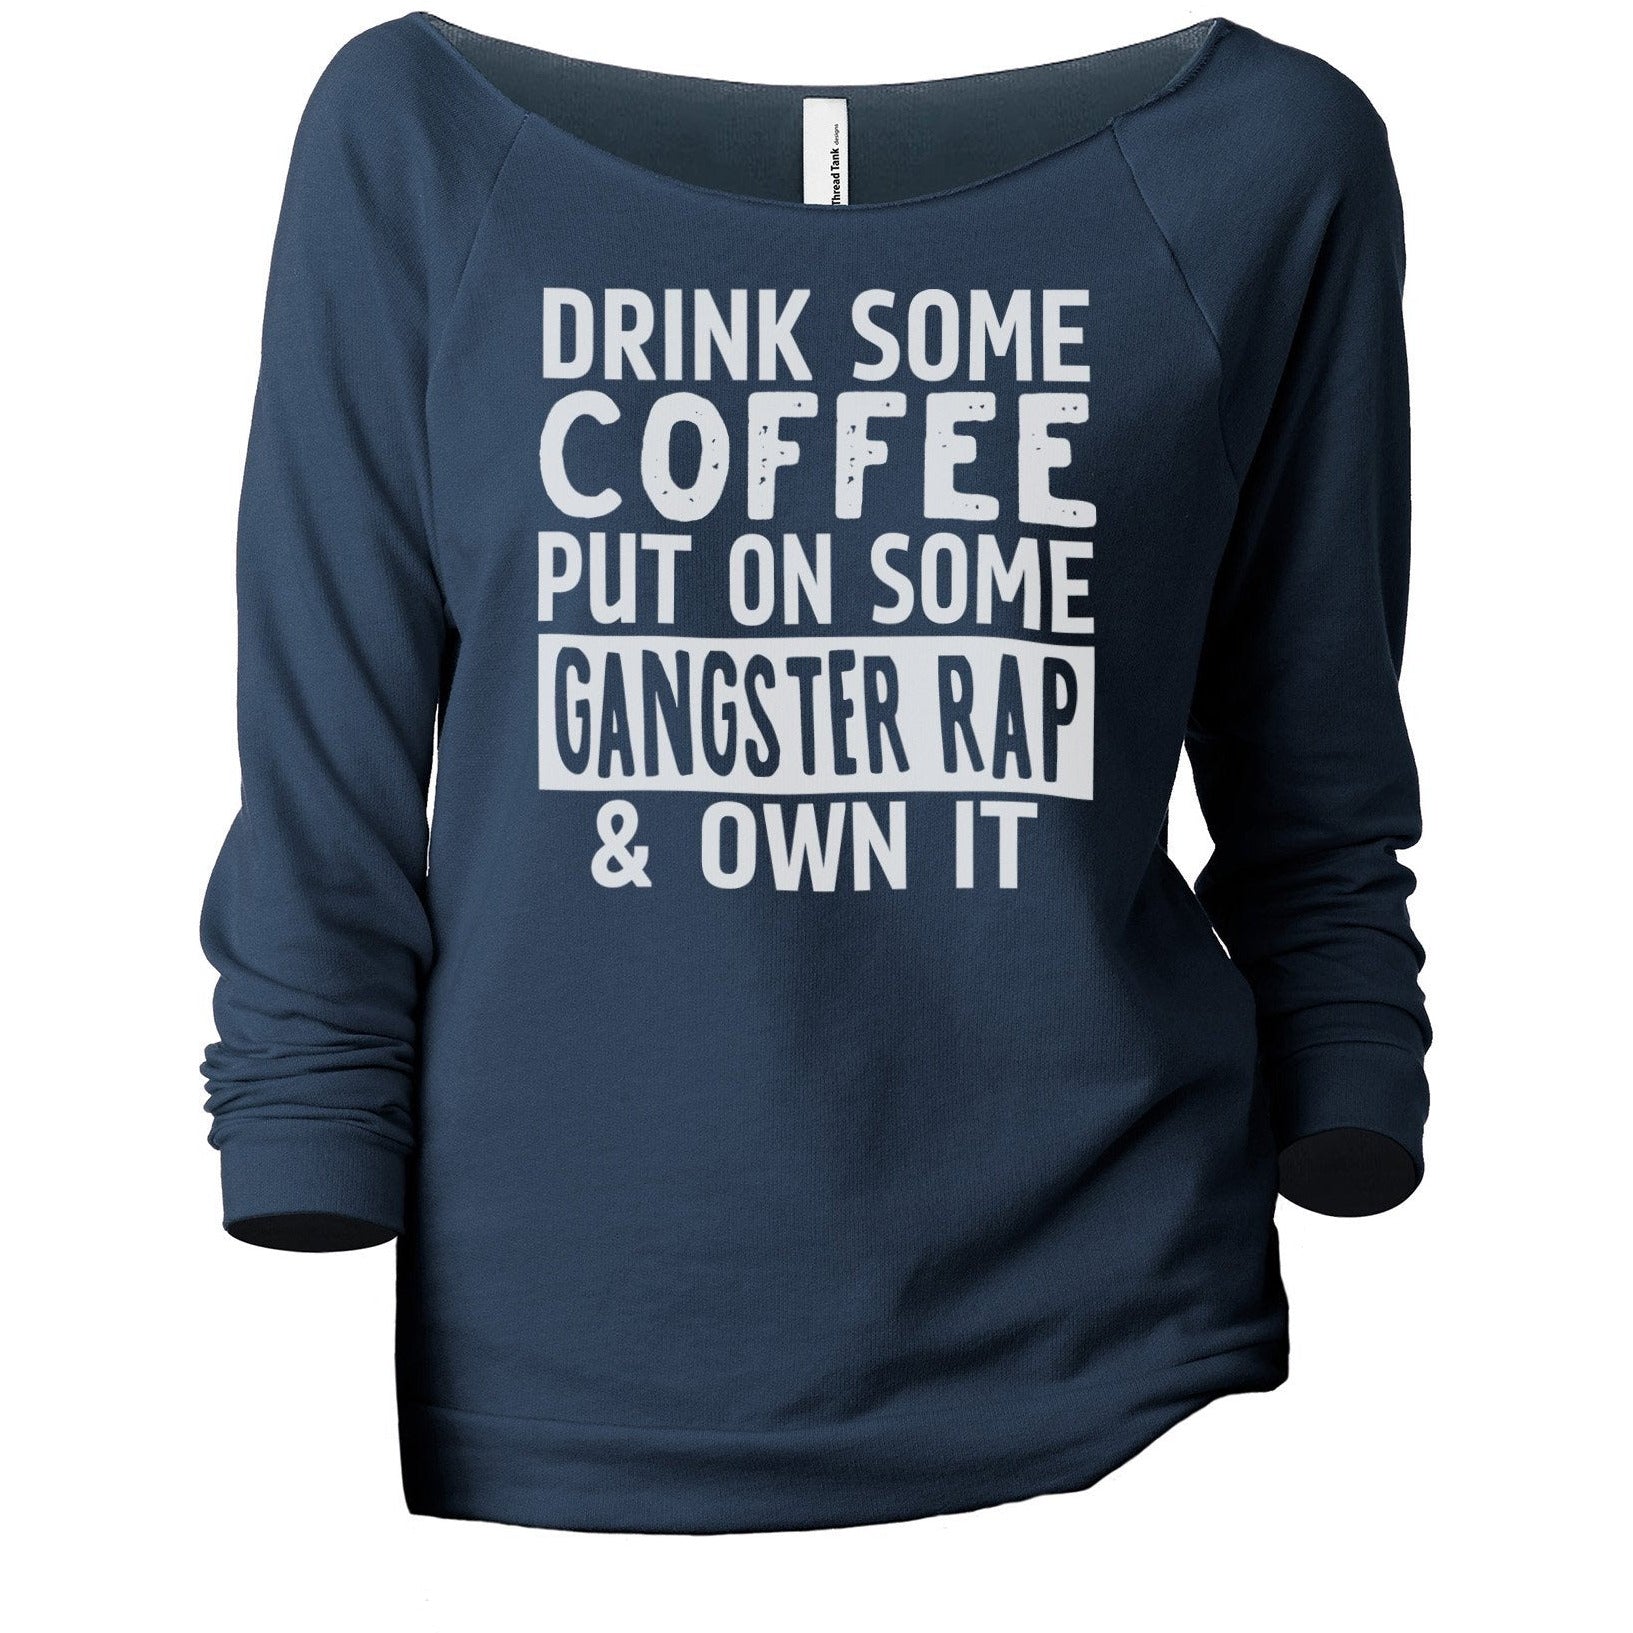 Drink Some Coffee Put on Some Gangster Rap and Own It Women's Graphic Printed Lightweight Slouchy 3/4 Sleeves Sweatshirt Navy